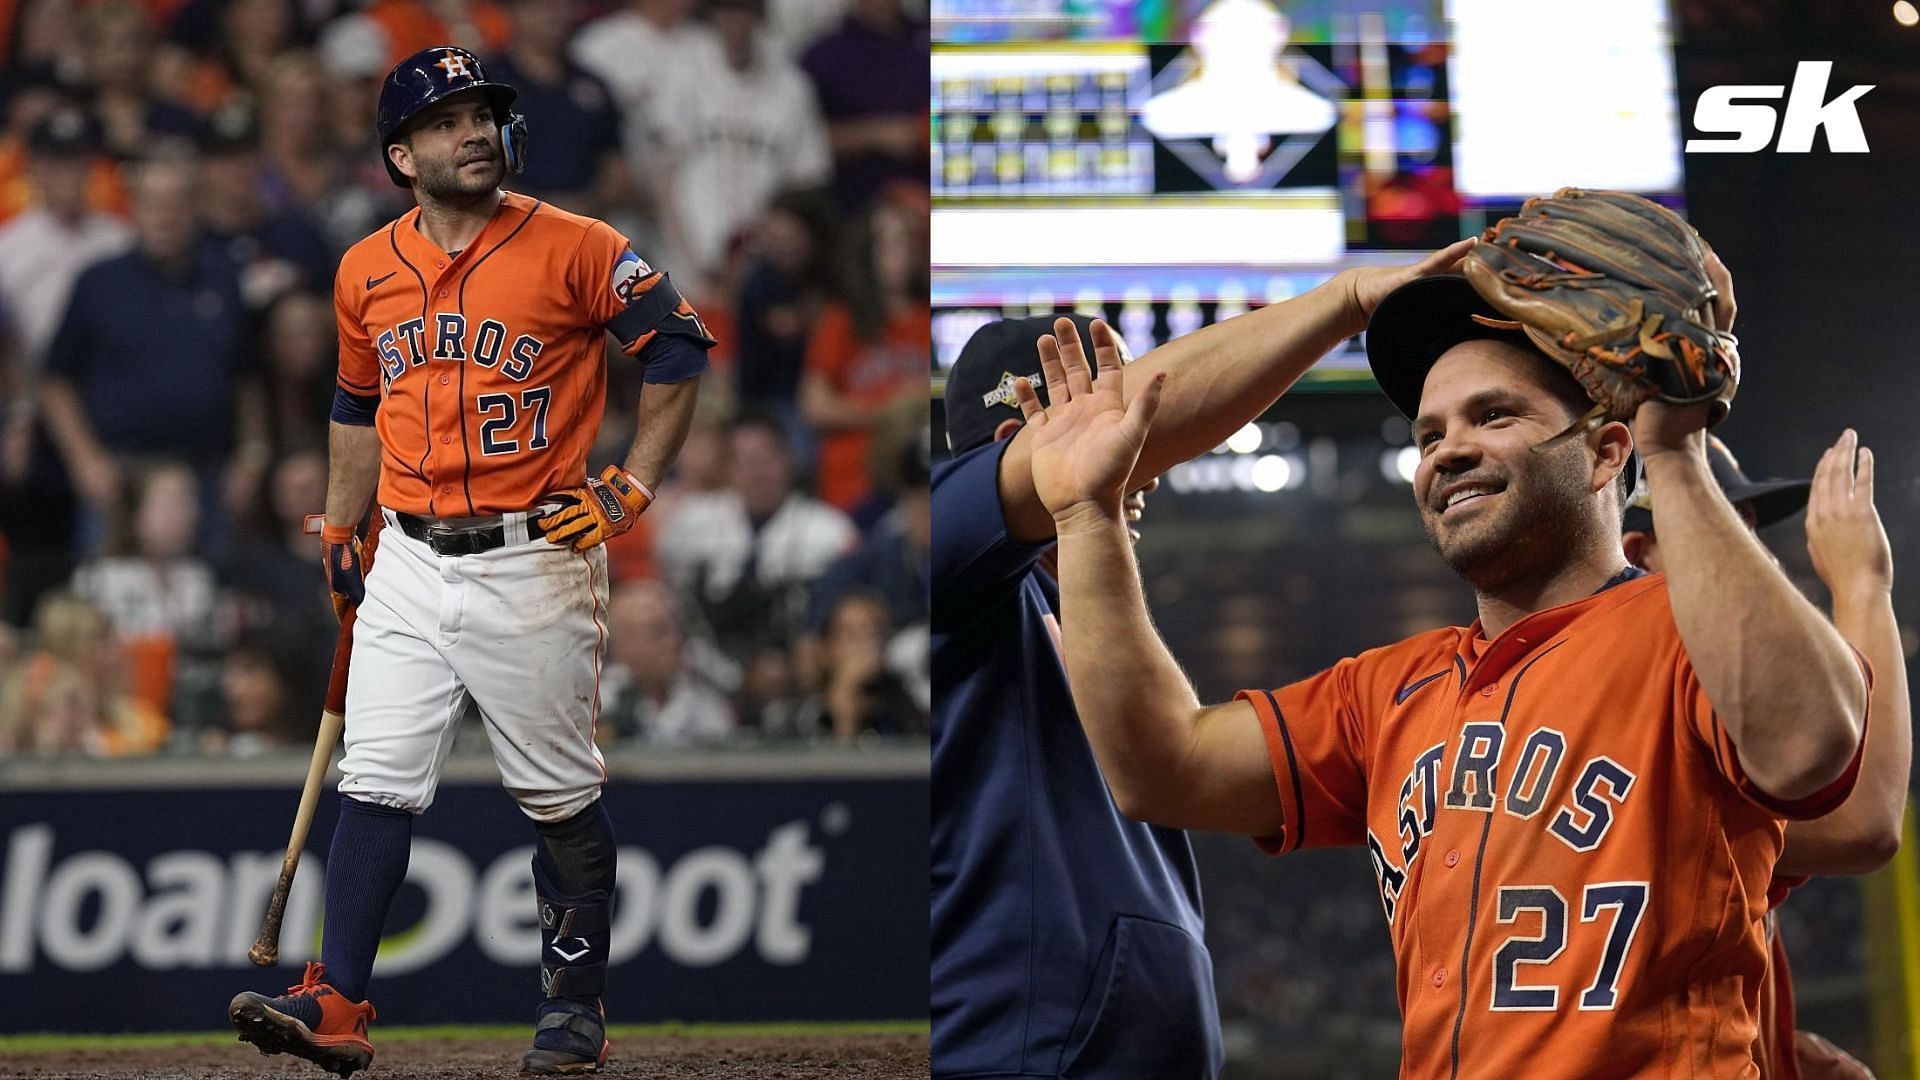 Google Bard believes that Jose Altuve will retire as a member of the Houston Astros